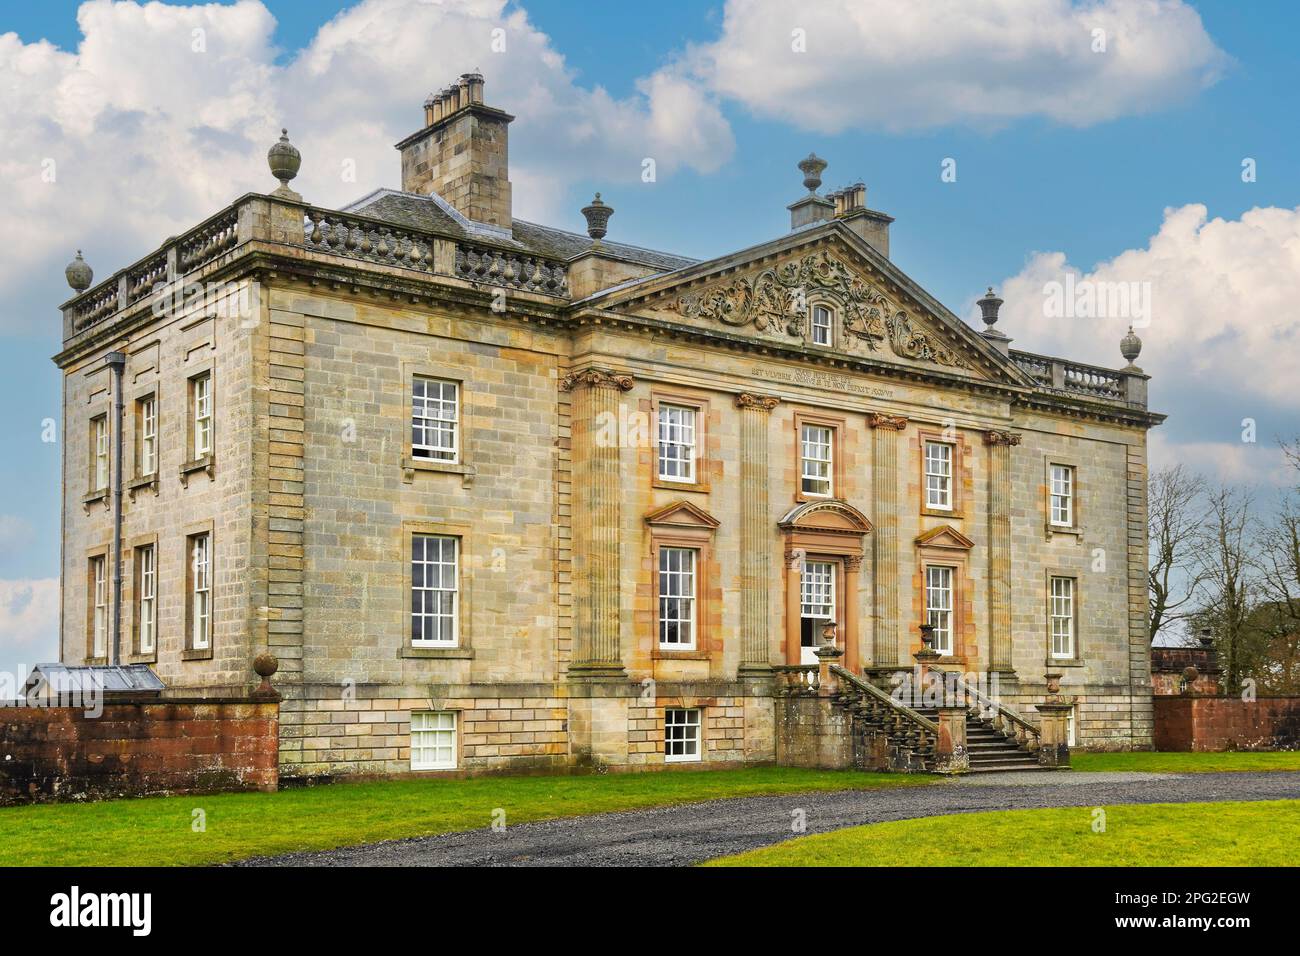 Boswell's Auchinleck House, an 18th century mansion designed by Robert Adam and Thomas Boswell, to be the family house of the Auchinleck Estate, Stock Photo